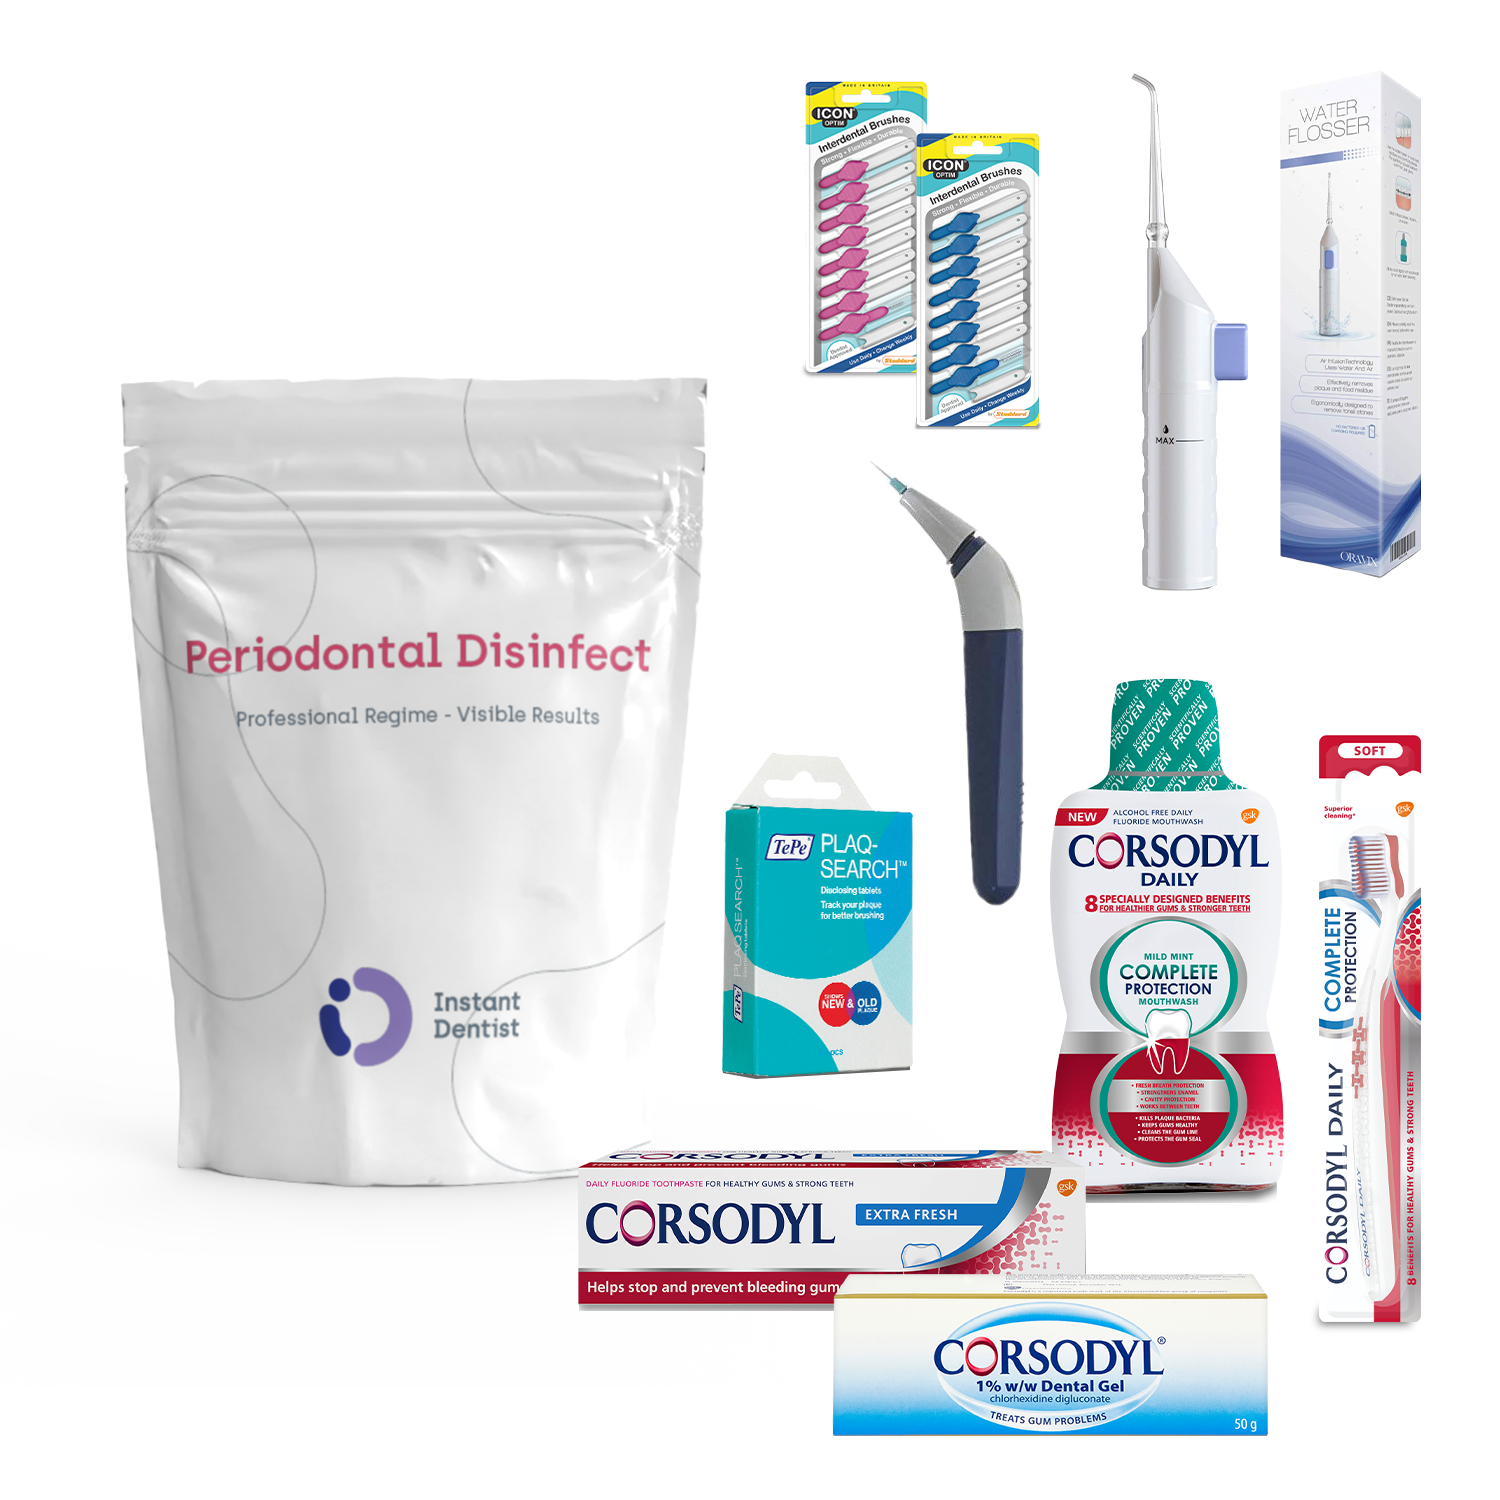 periodontal disinfect regime recommended through online dental care